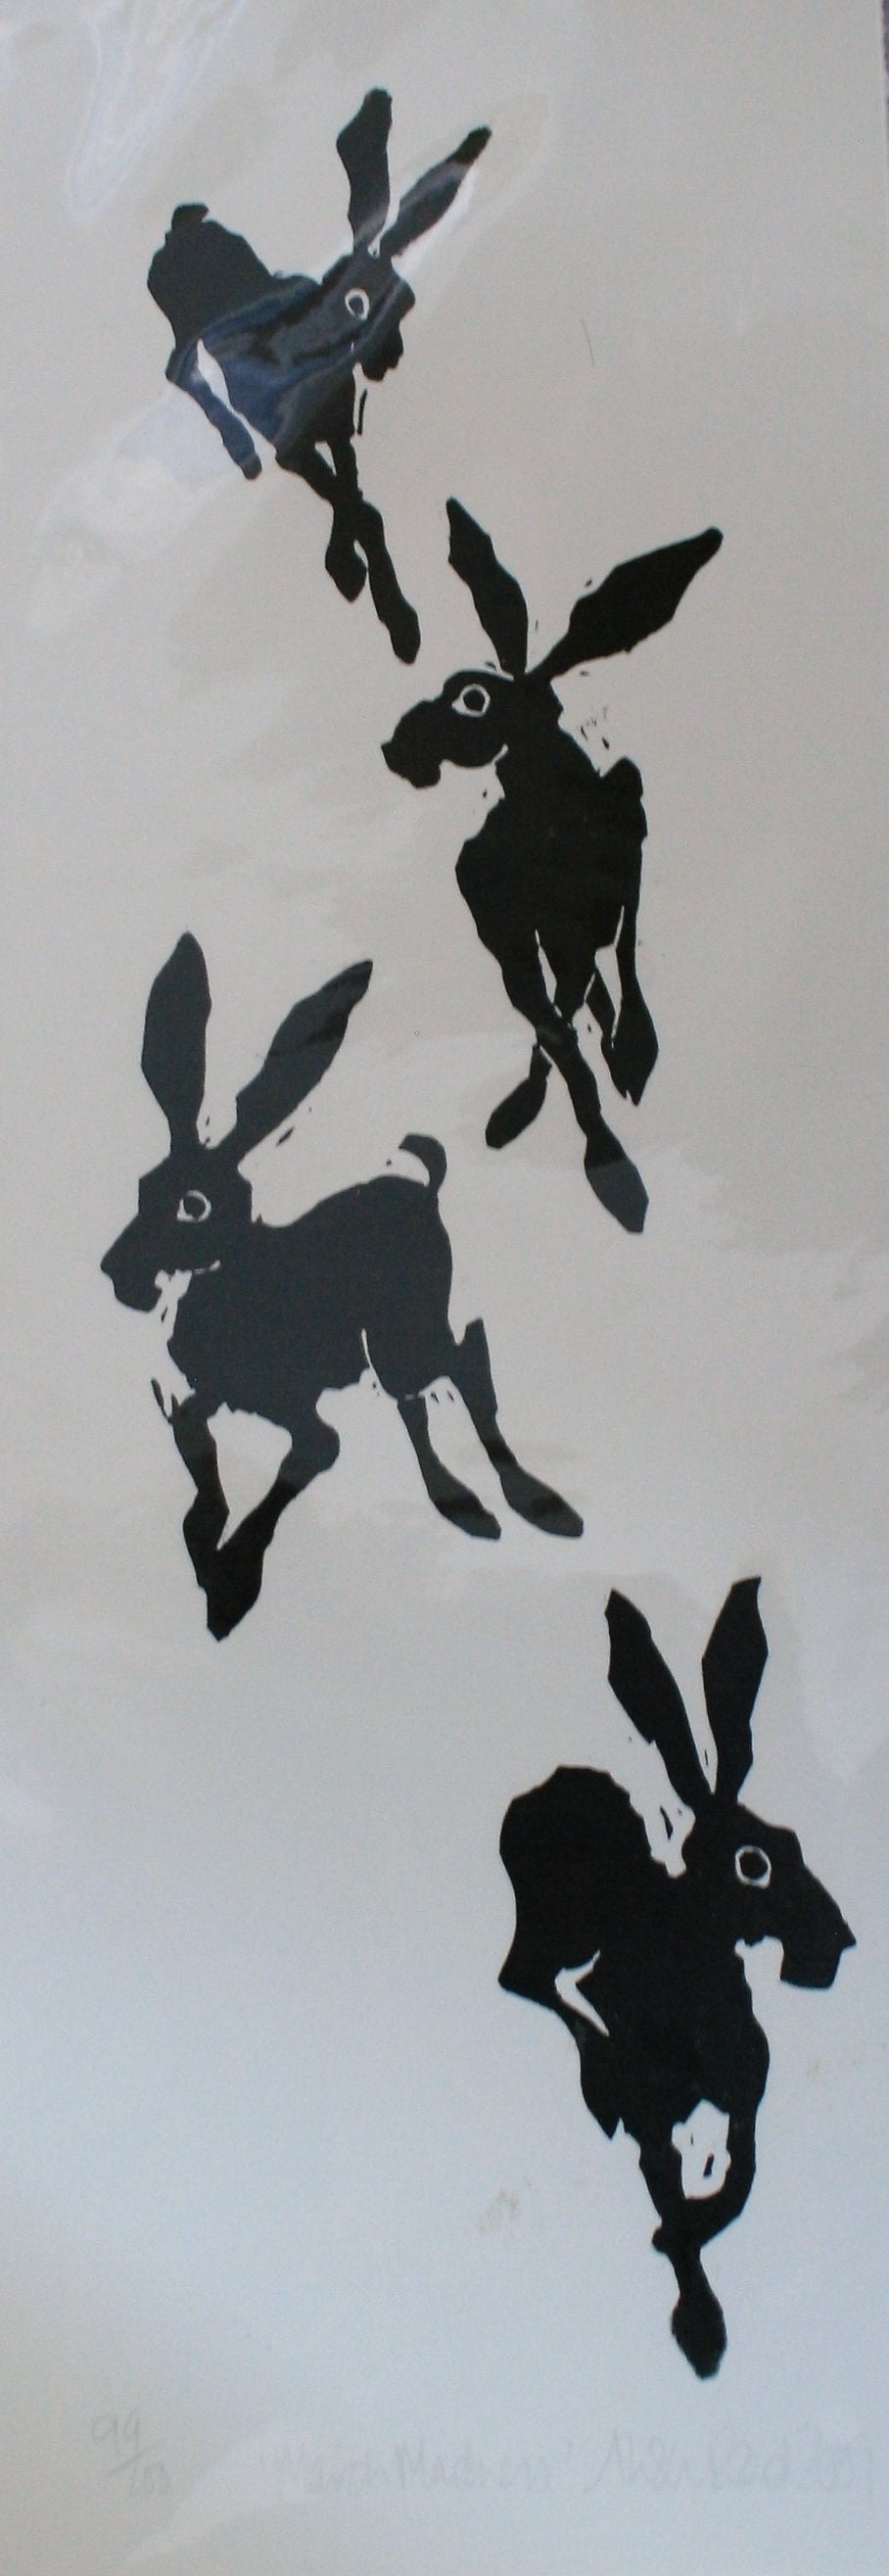 Alison Read - Lino artist-  Print of sprinting hares- 'March Madness'